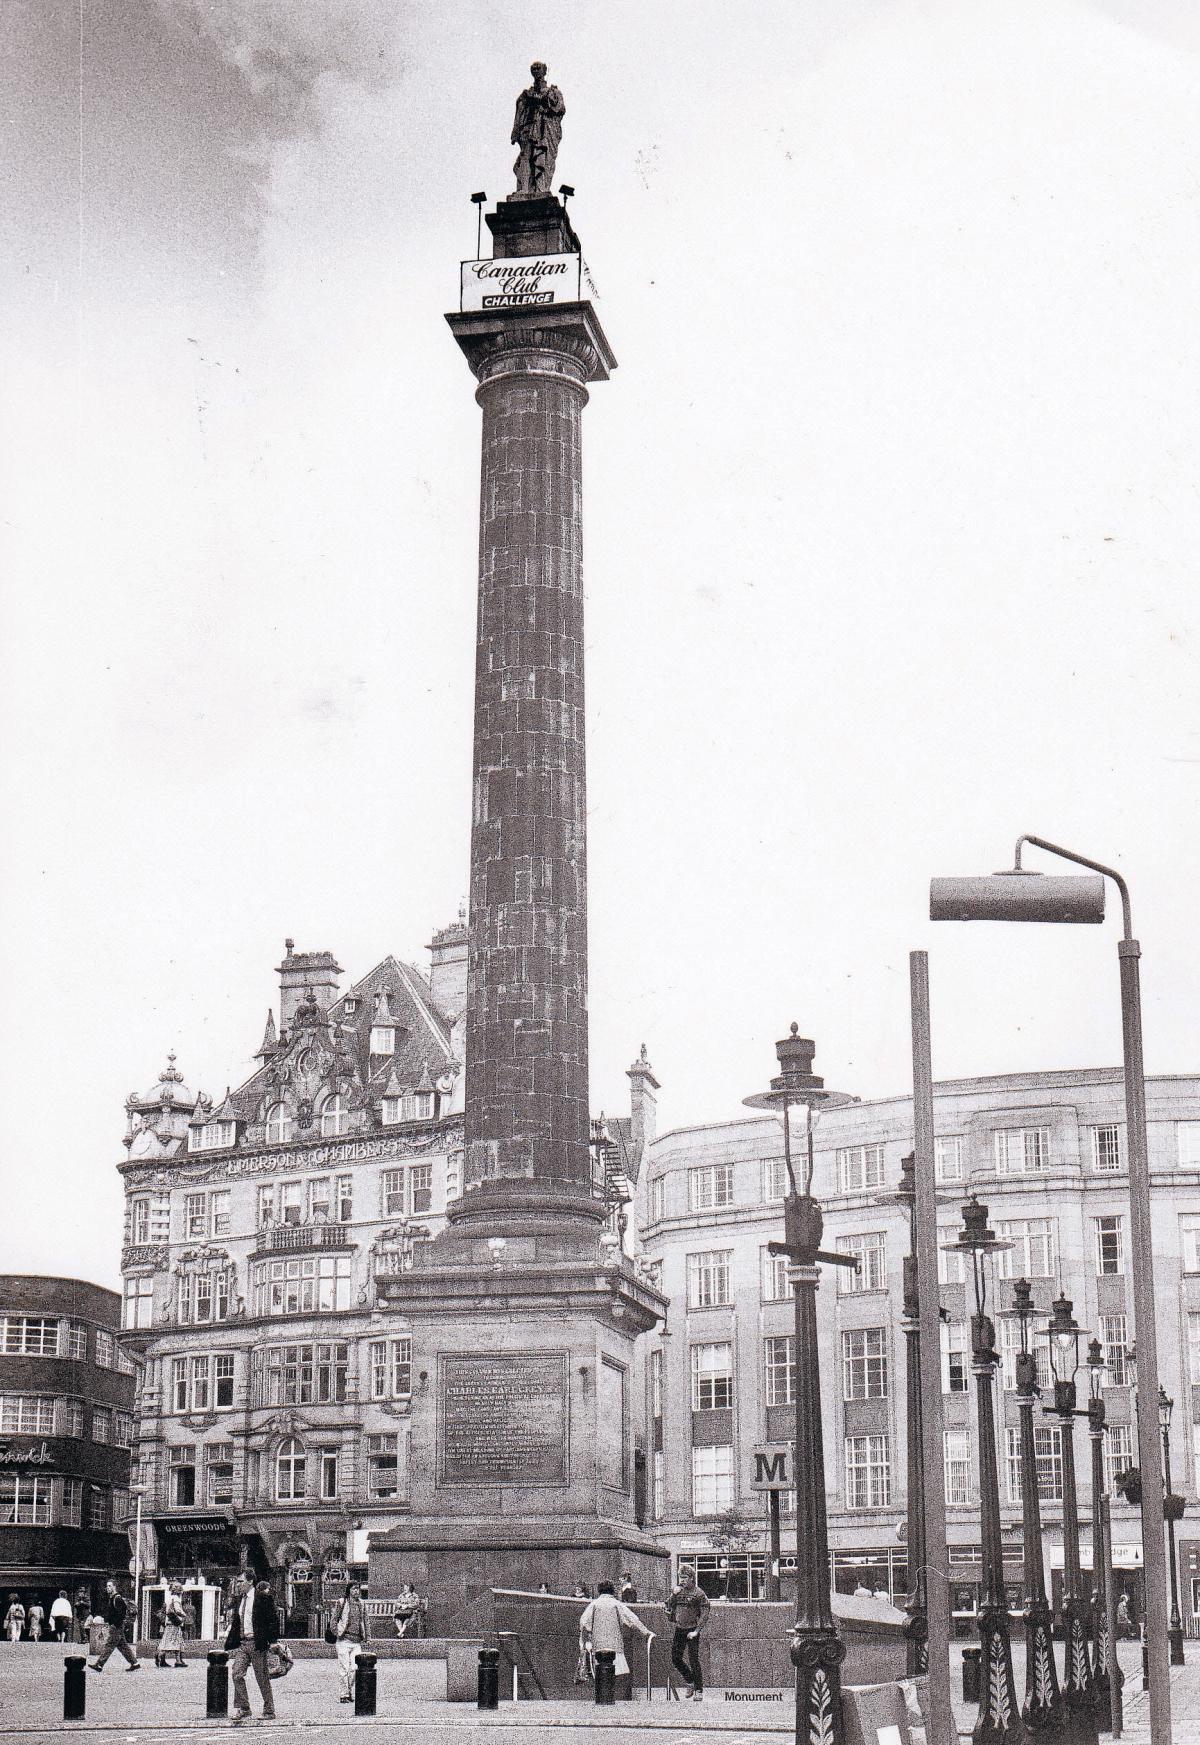 Grey’s Monument: There is controversy about Newcastle United having an advert for payday lender Wonga on their shirts, but here, in 1985, an advert for the "Canadian Club Challenge" hangs from the top of Newcastle's great landmark, the impressive monume